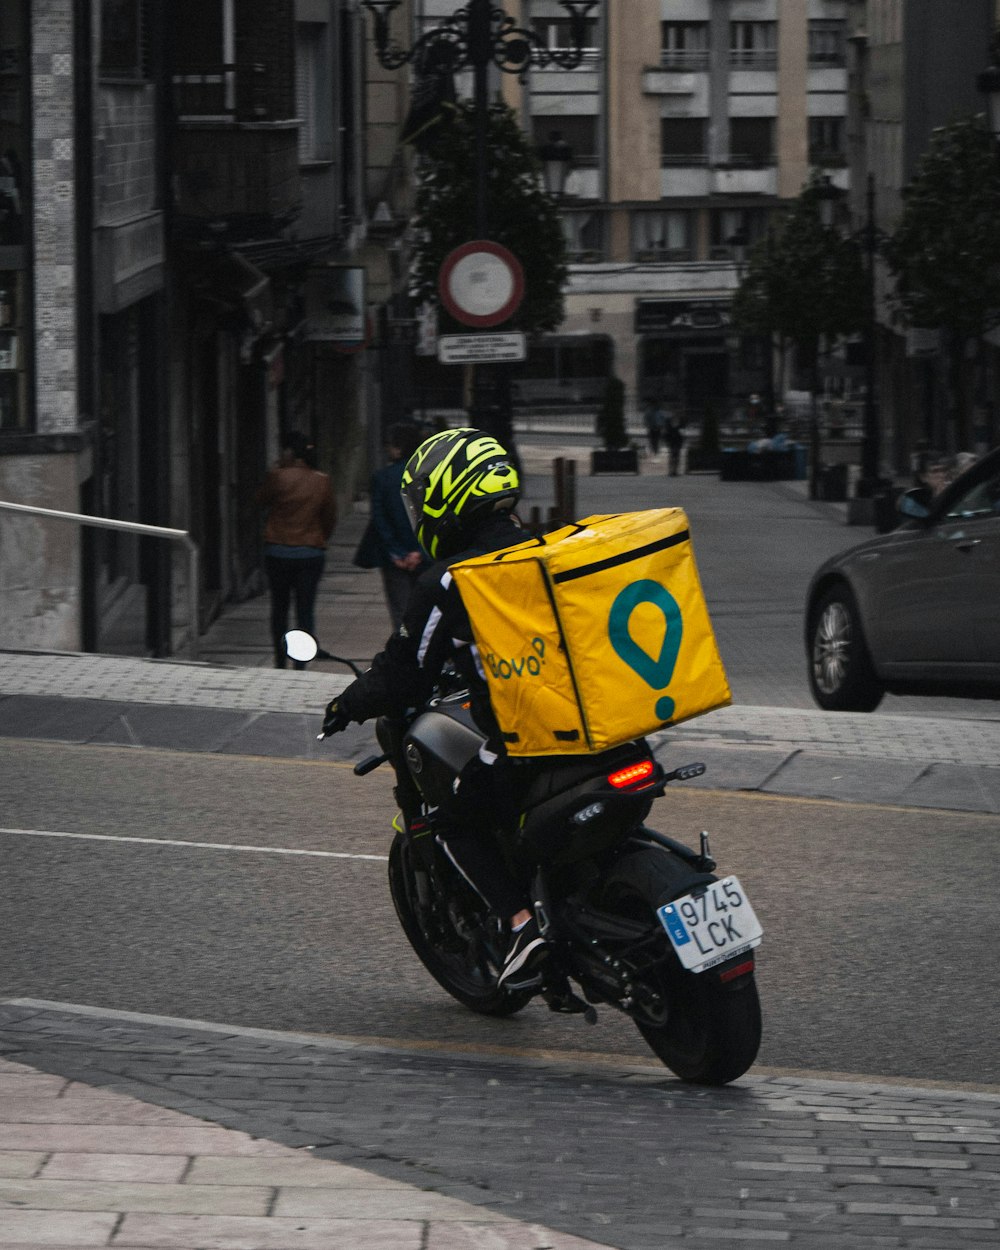 man in yellow helmet riding black motorcycle on road during daytime